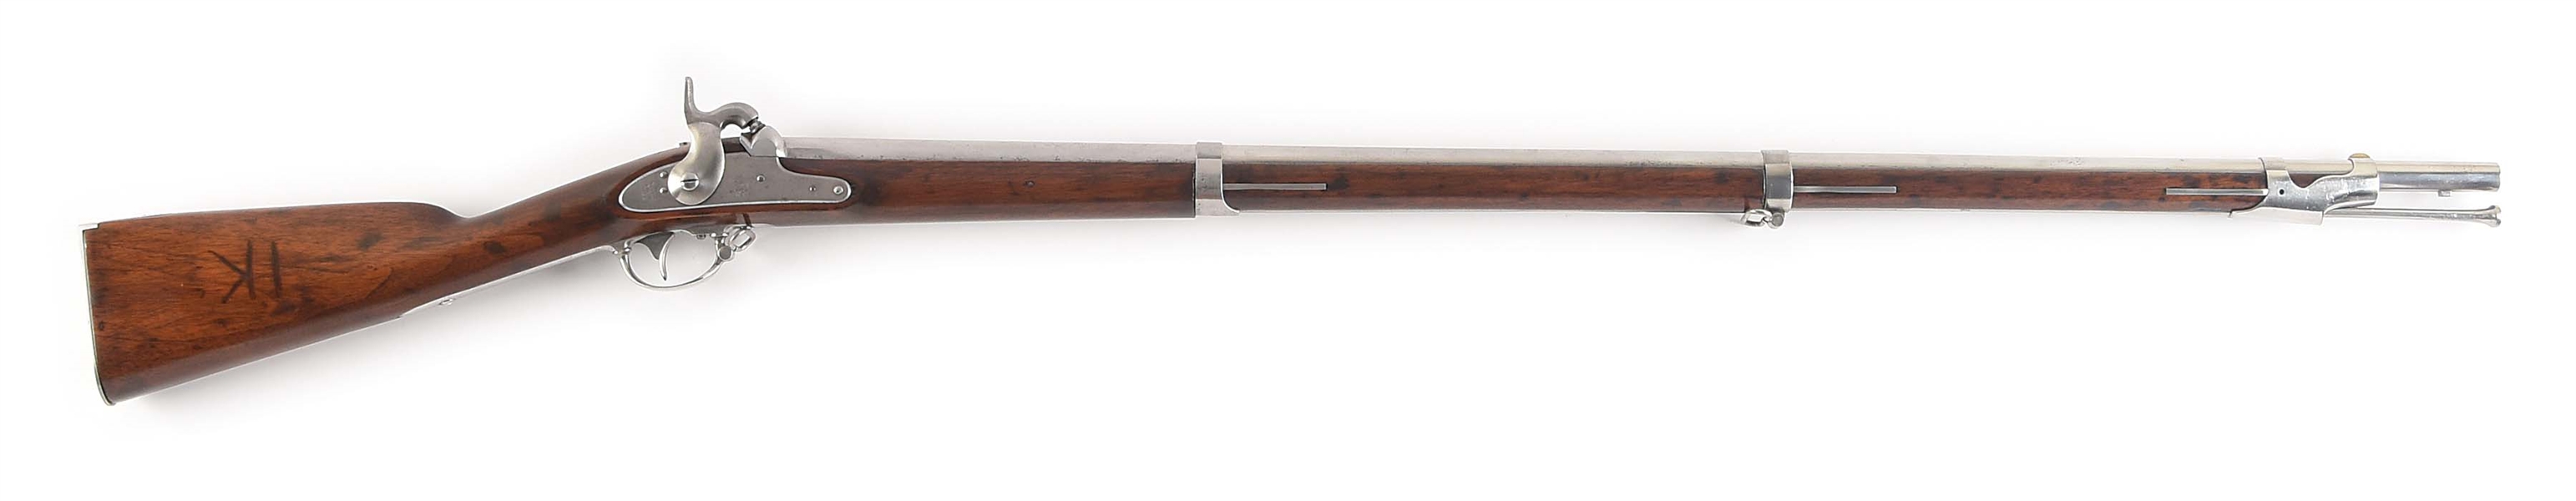 (A) SCARCE US SPRINGFIELD MODEL 185 CADET MUSKET DATED 1853.